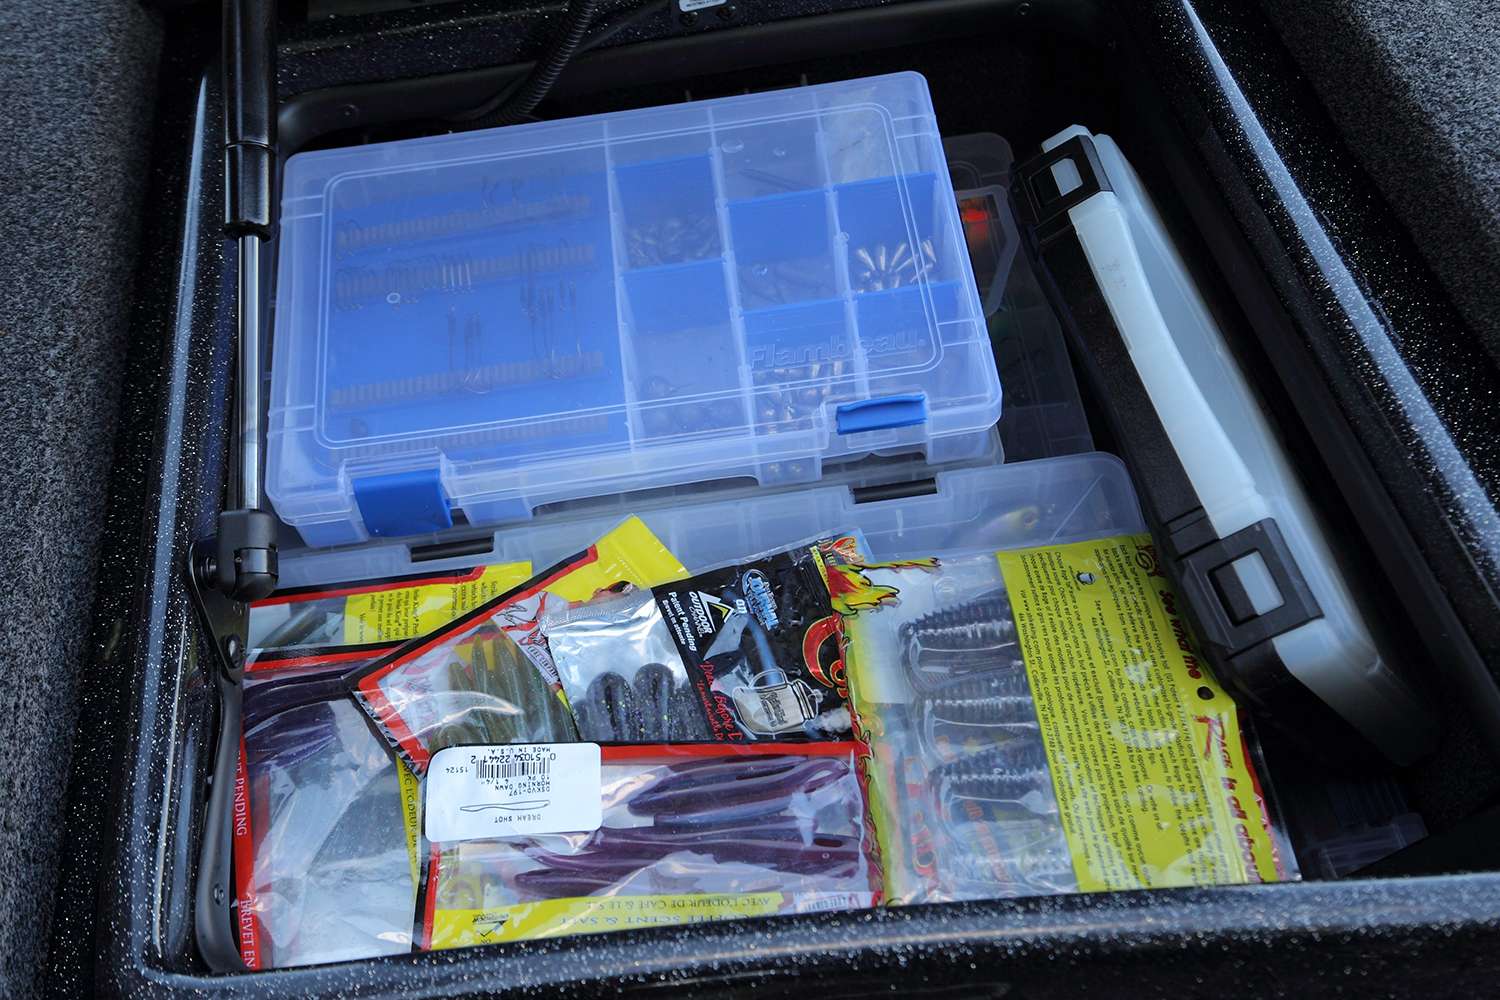 Another compartment is fully stacked with everything VanDam needs for fishing soft plastics.